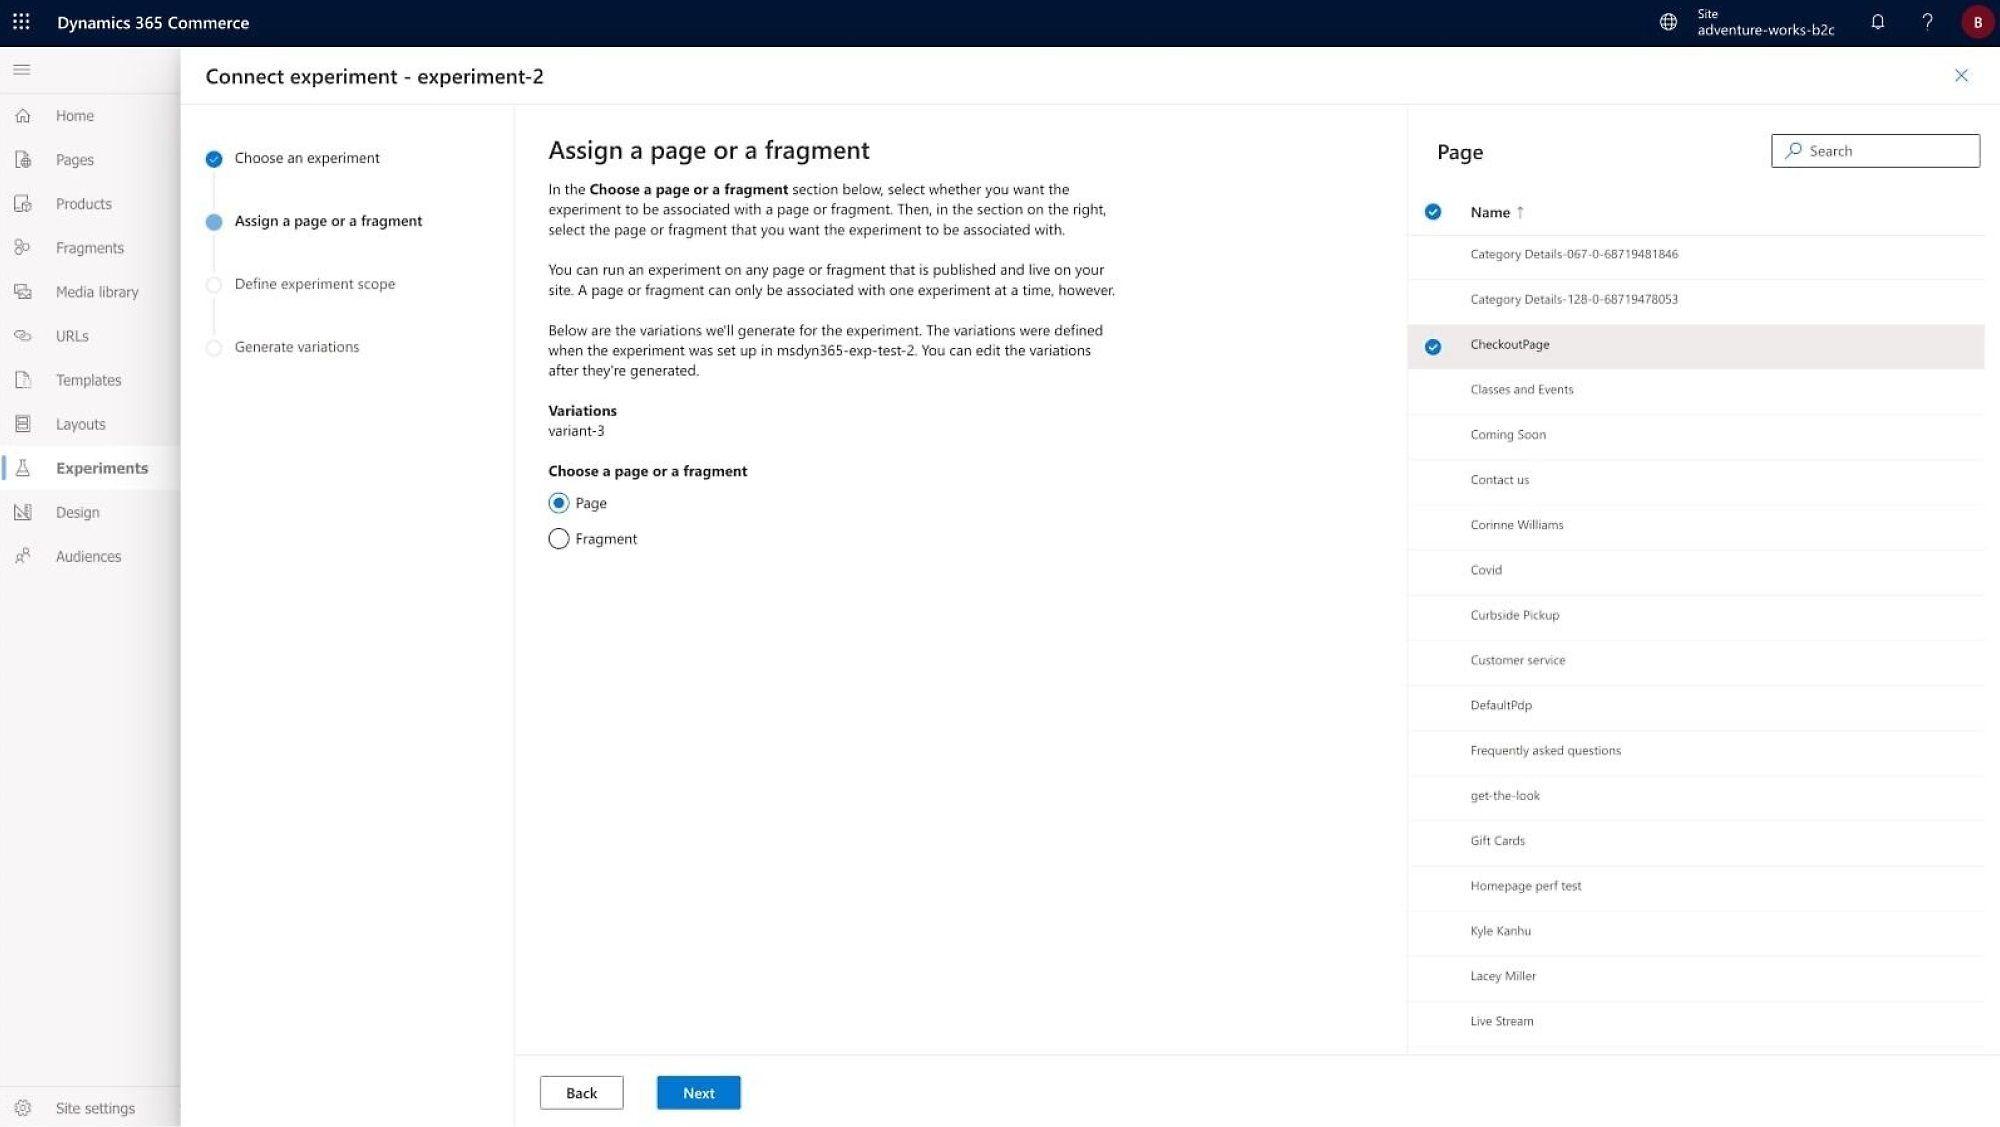 Dynamics 365 Commerce: Experiment interface with page and fragment options. Variations defined for layout testing.